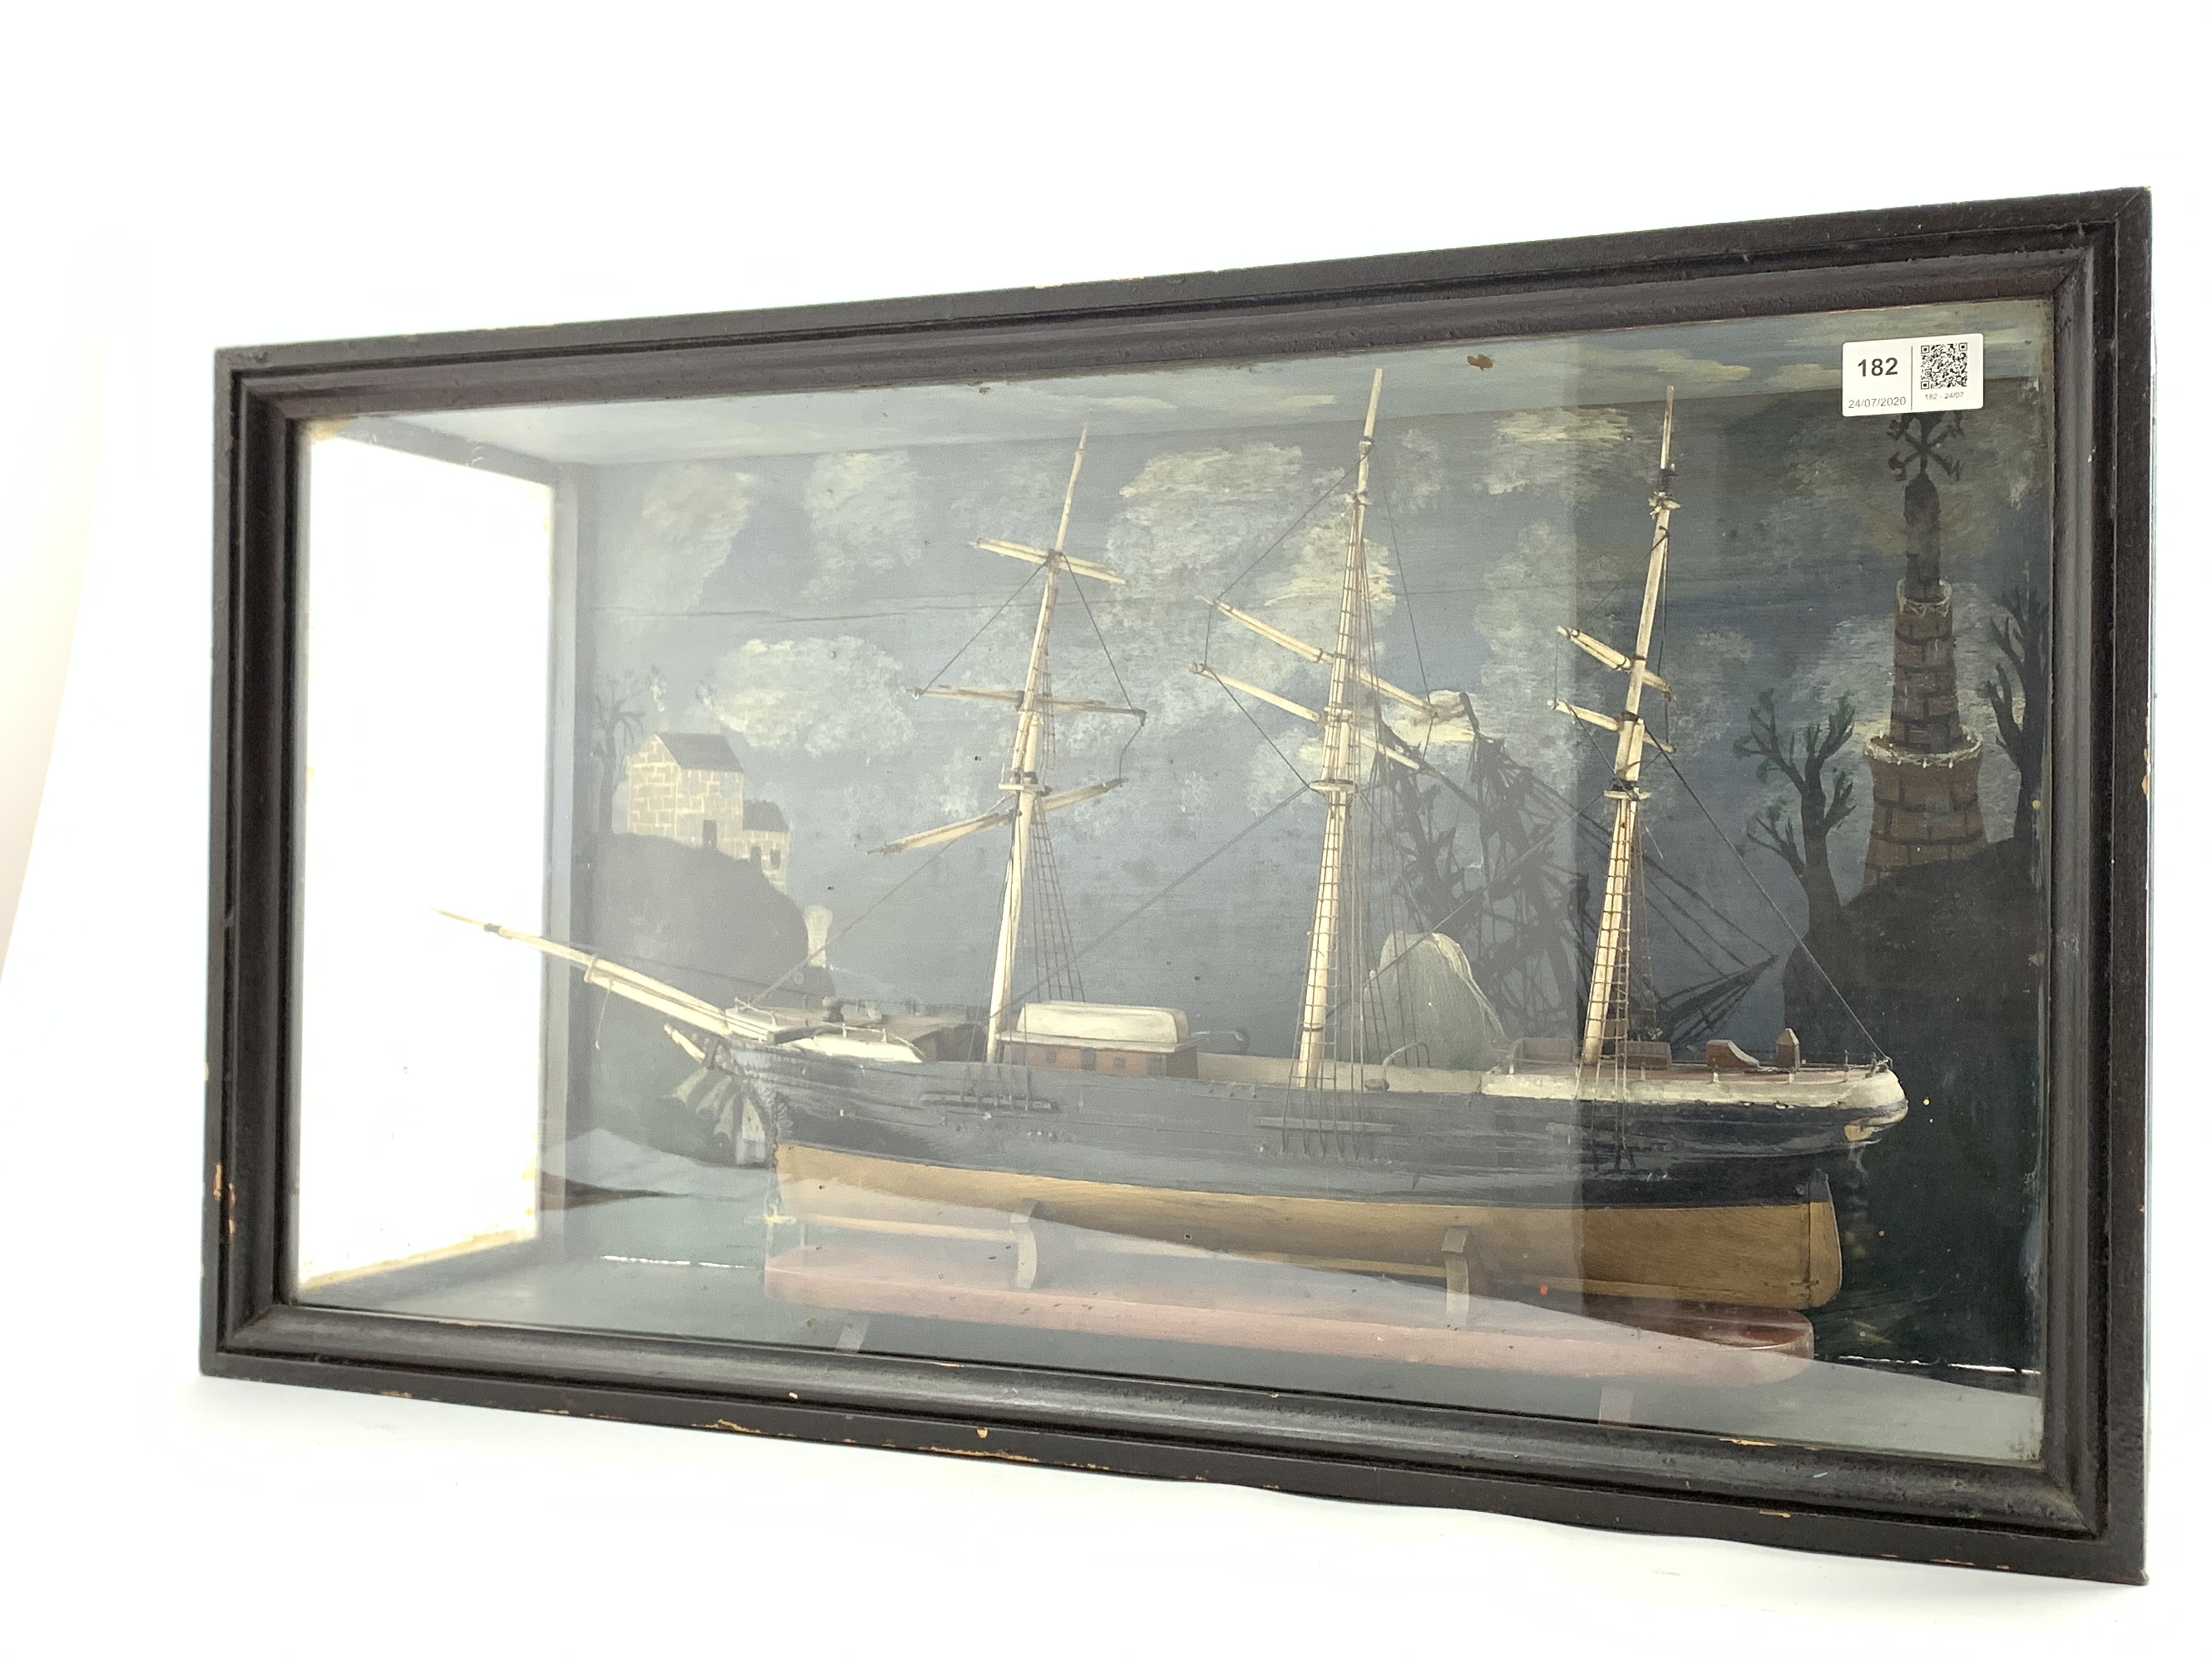 Model of a three masted sailing ship in a glazed display case with painted background 39cm x 67cm x